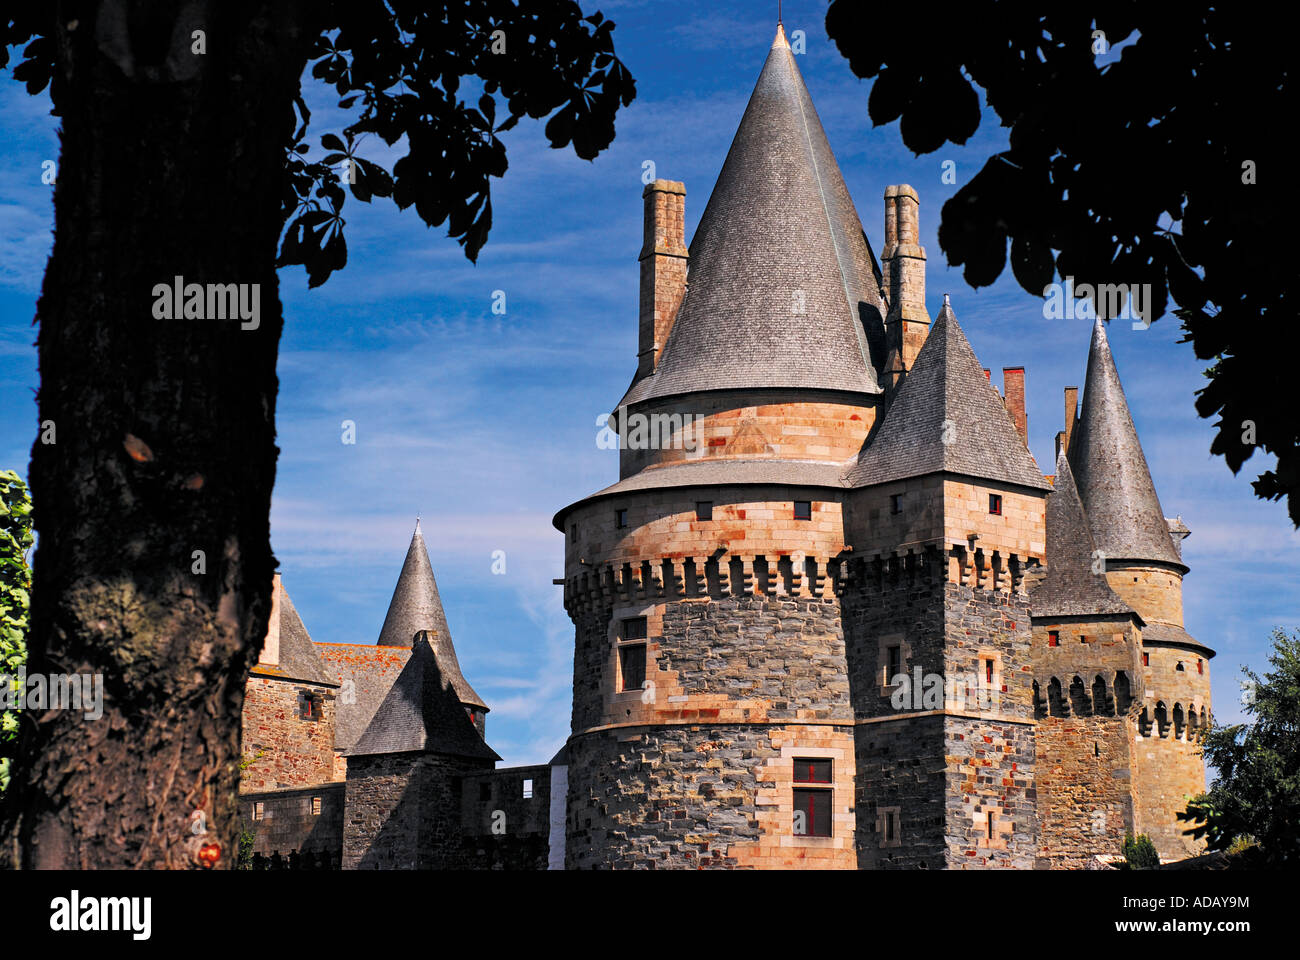 Towers of the medieval castle of Vitré, Brittany, France Stock Photo